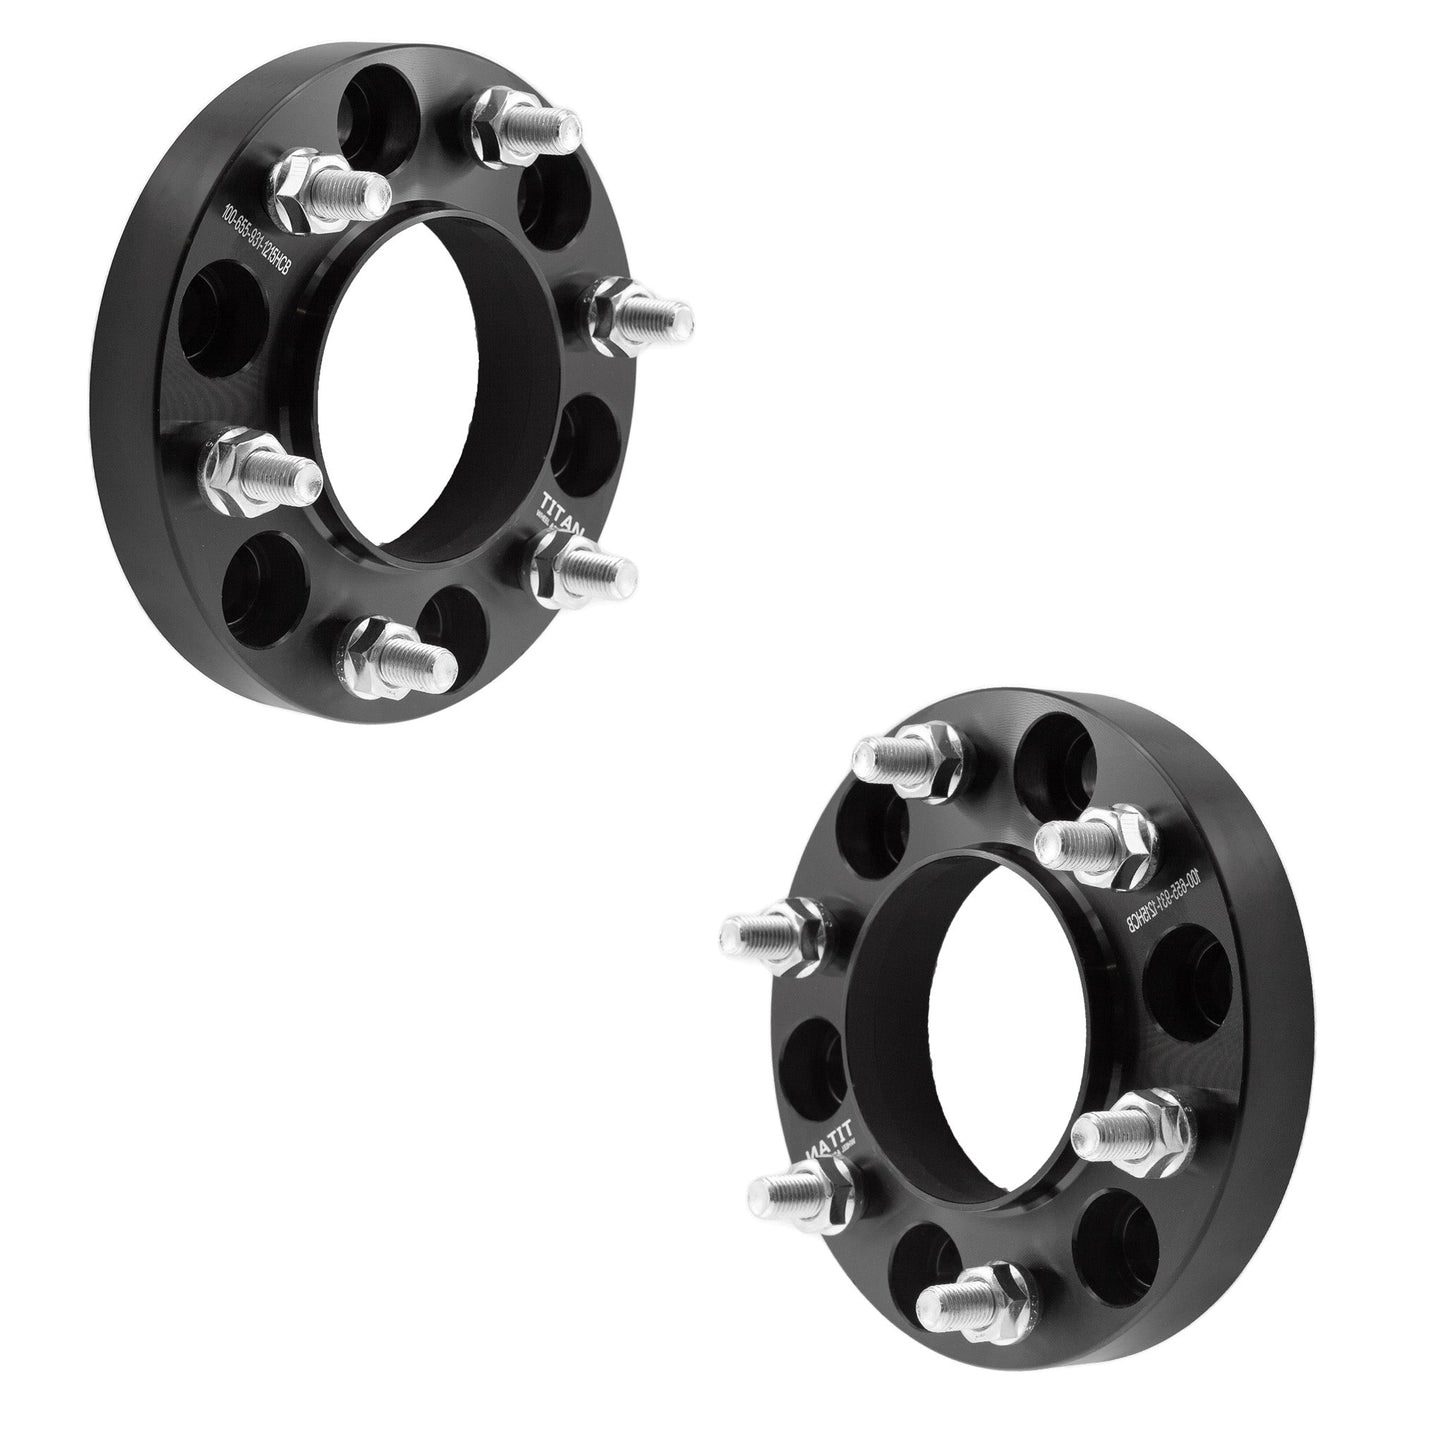 1" (25mm) Titan Wheel Spacers for Ford Bronco 2021-2022 Ranger 2019+ | 6x5.5 (6x139.7) | 93.1 Hubcentric | 12x1.5 Studs | Set of 4 | Titan Wheel Accessories